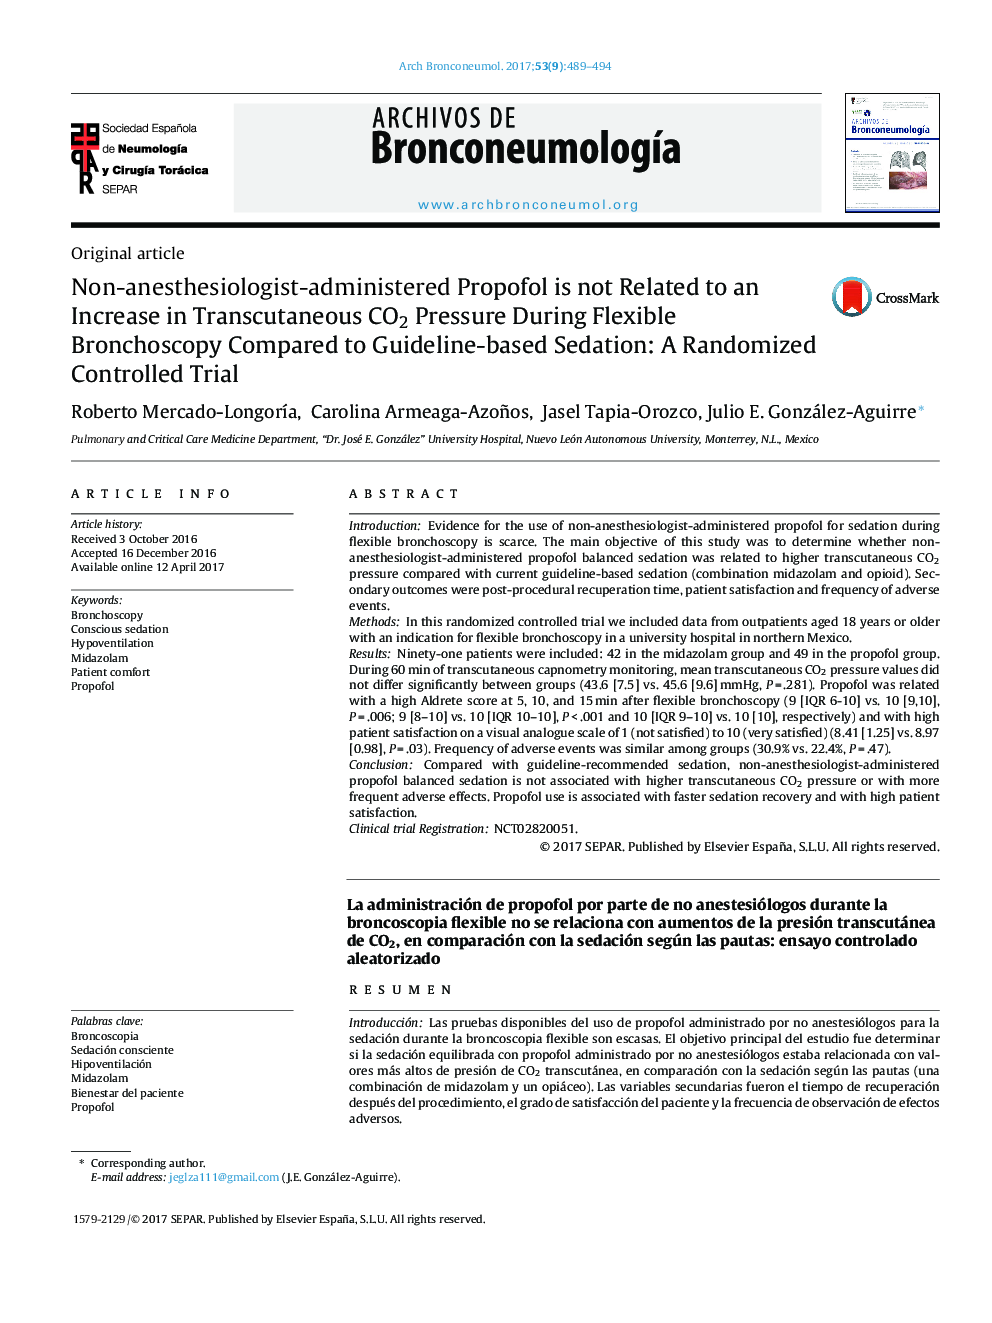 Original articleNon-anesthesiologist-administered Propofol is not Related to an Increase in Transcutaneous CO2 Pressure During Flexible Bronchoscopy Compared to Guideline-based Sedation: A Randomized Controlled TrialLa administración de propofol por part